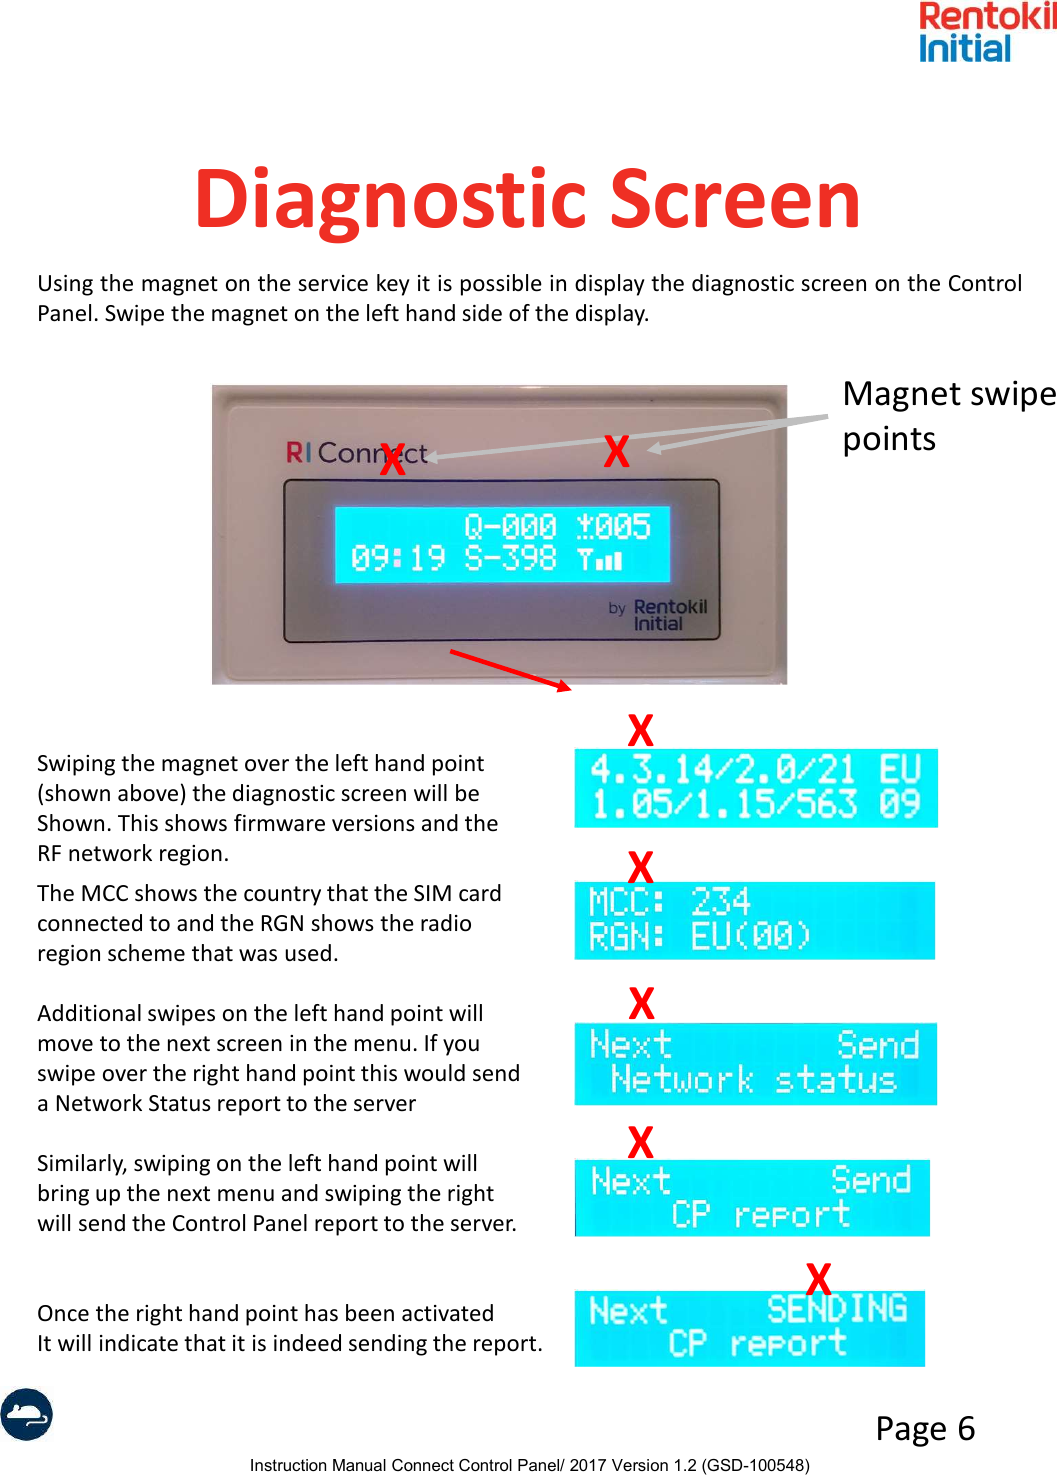 Instruction Manual Connect Control Panel/ 2017 Version 1.2 (GSD-100548)Page 6Diagnostic ScreenUsing the magnet on the service key it is possible in display the diagnostic screen on the ControlPanel. Swipe the magnet on the left hand side of the display.Swiping the magnet over the left hand point(shown above) the diagnostic screen will beShown. This shows firmware versions and theRF network region.The MCC shows the country that the SIM cardconnected to and the RGN shows the radioregion scheme that was used.Additional swipes on the left hand point willmove to the next screen in the menu. If youswipe over the right hand point this would senda Network Status report to the serverSimilarly, swiping on the left hand point willbring up the next menu and swiping the rightwill send the Control Panel report to the server.Once the right hand point has been activatedIt will indicate that it is indeed sending the report.XXMagnet swipepointsXXXXX